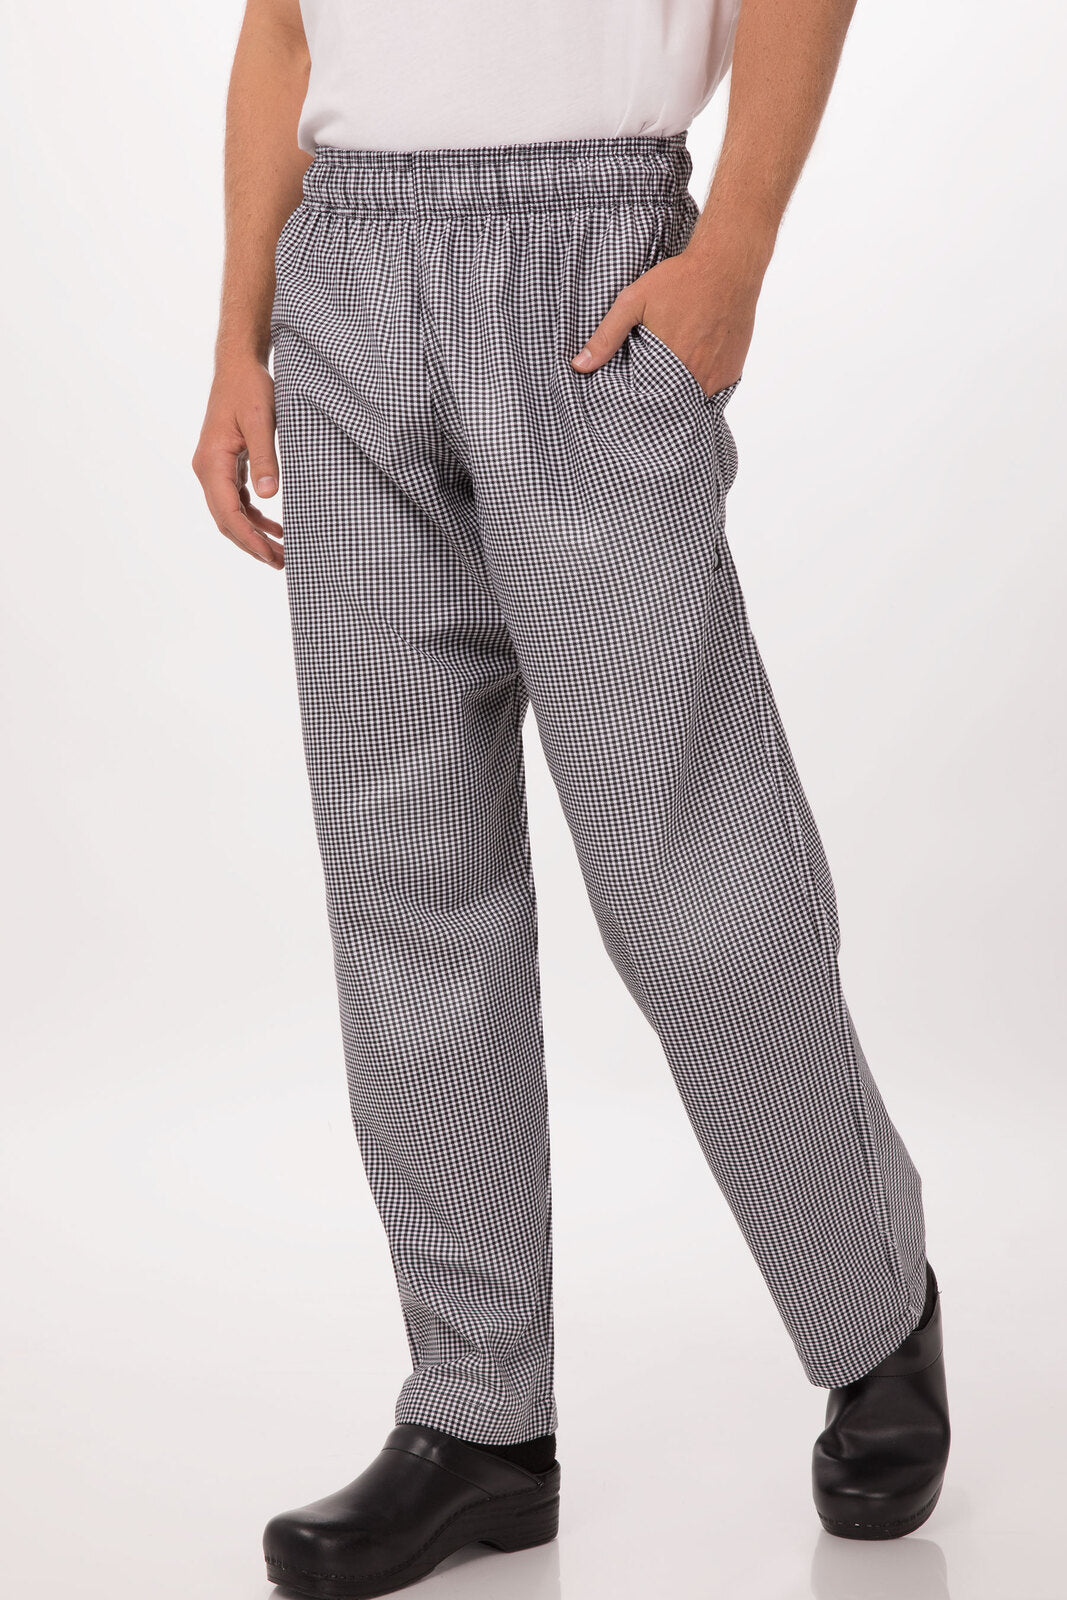 Chef Works Essential Baggy Chef Pants-(NBCP)